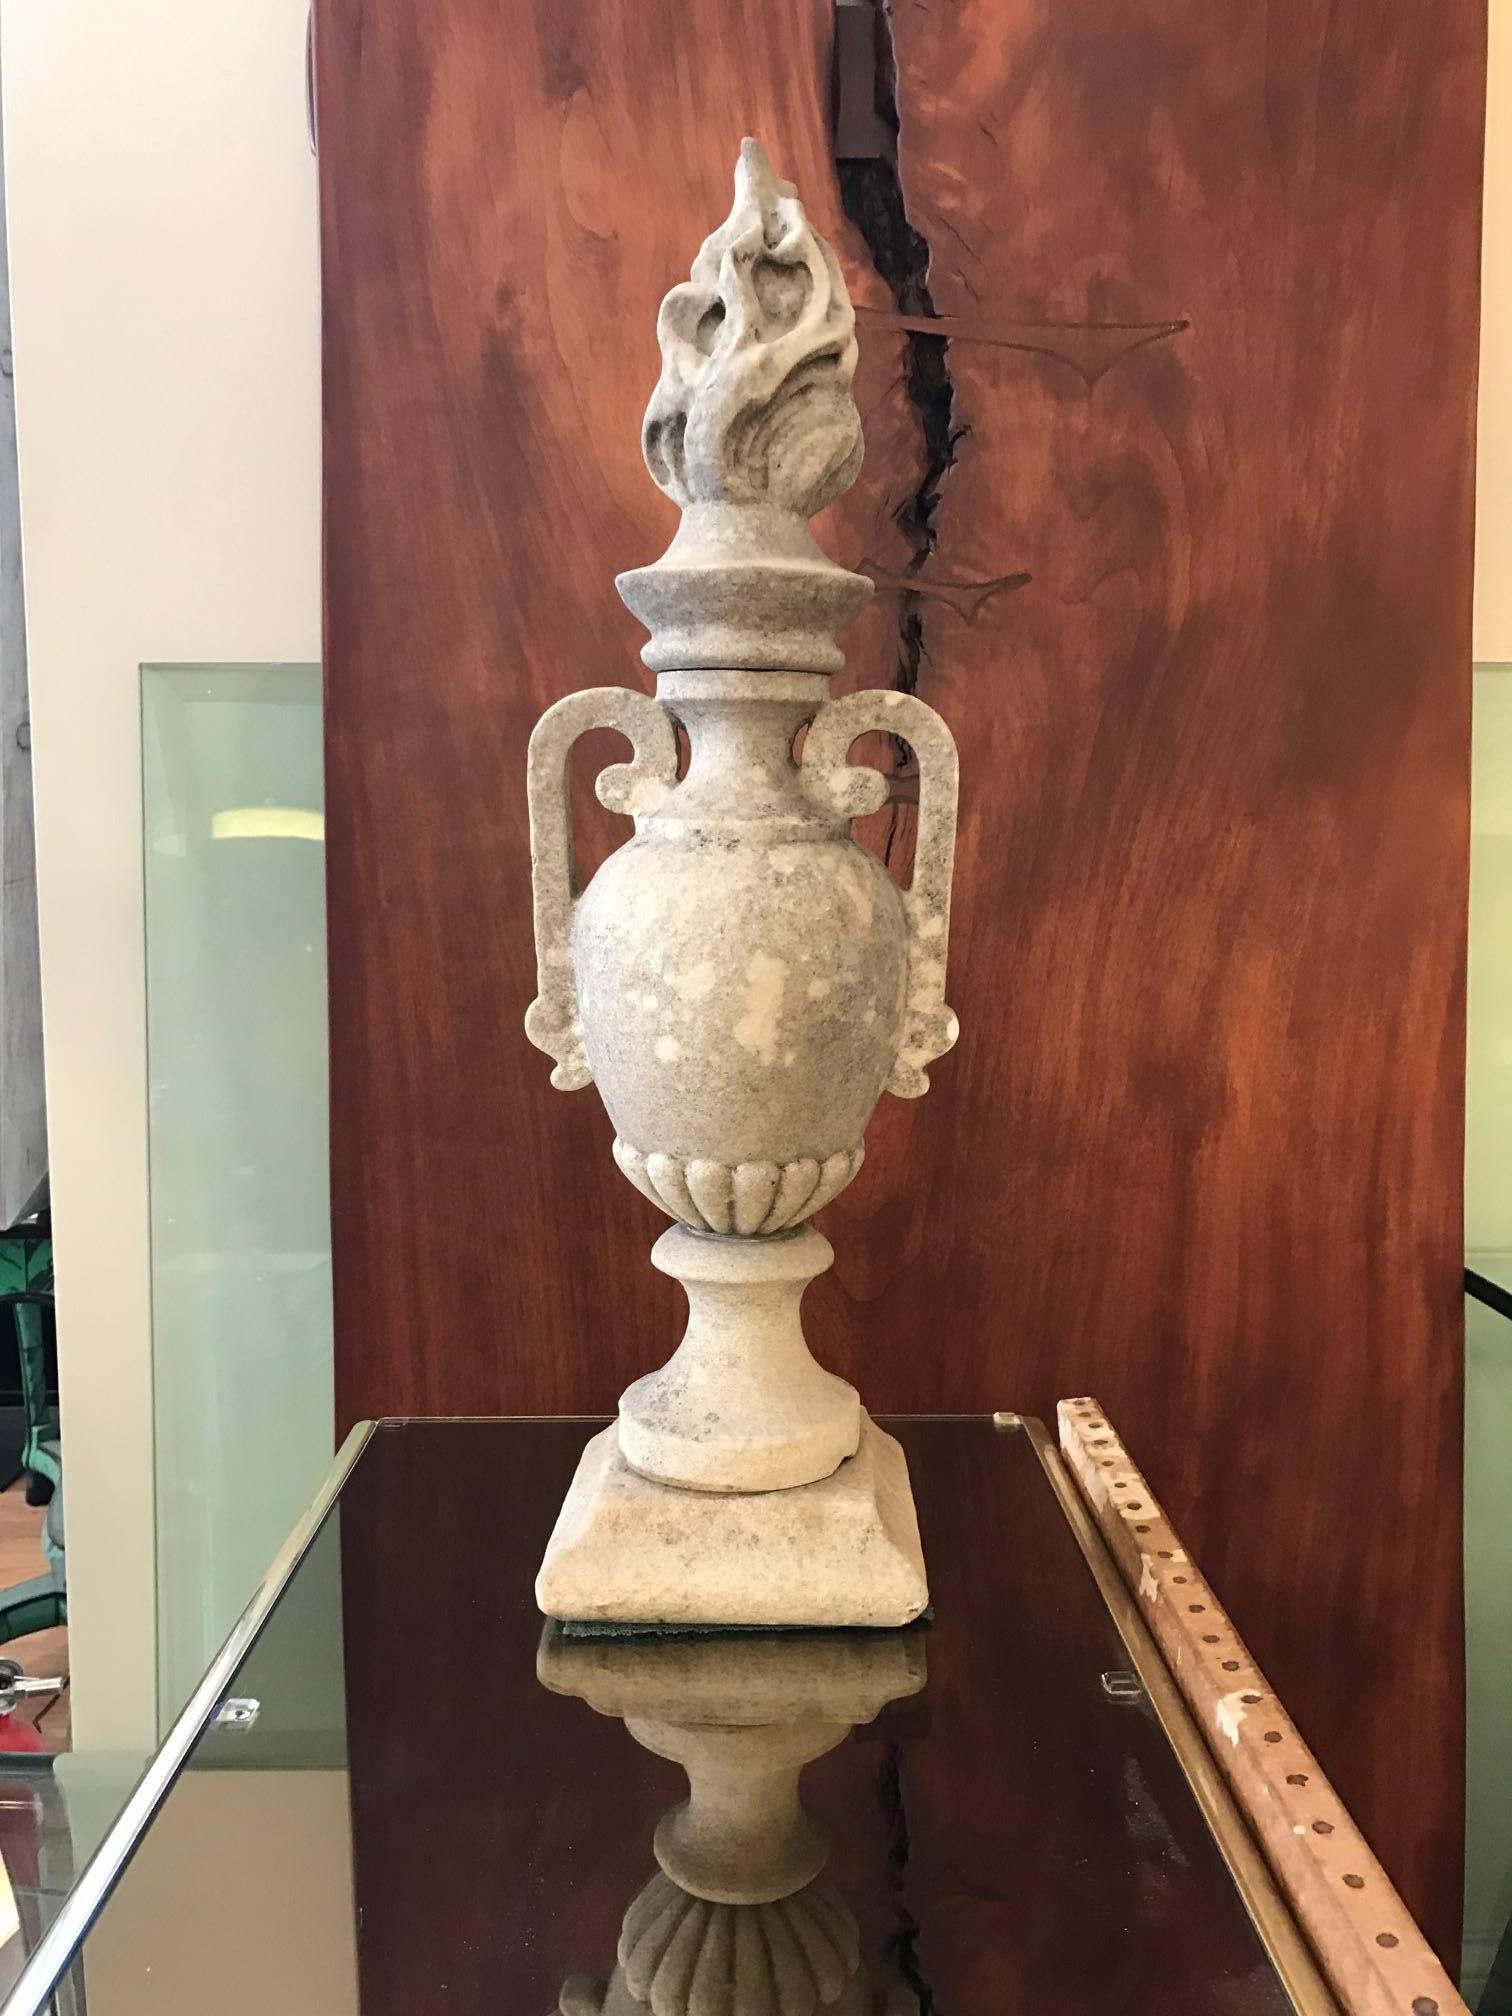 Carved 19th century sold marble garden urn with pierced handles on its sides. The top is caped with a fantastic carved flame. Versatile decorative element in the home or garden.